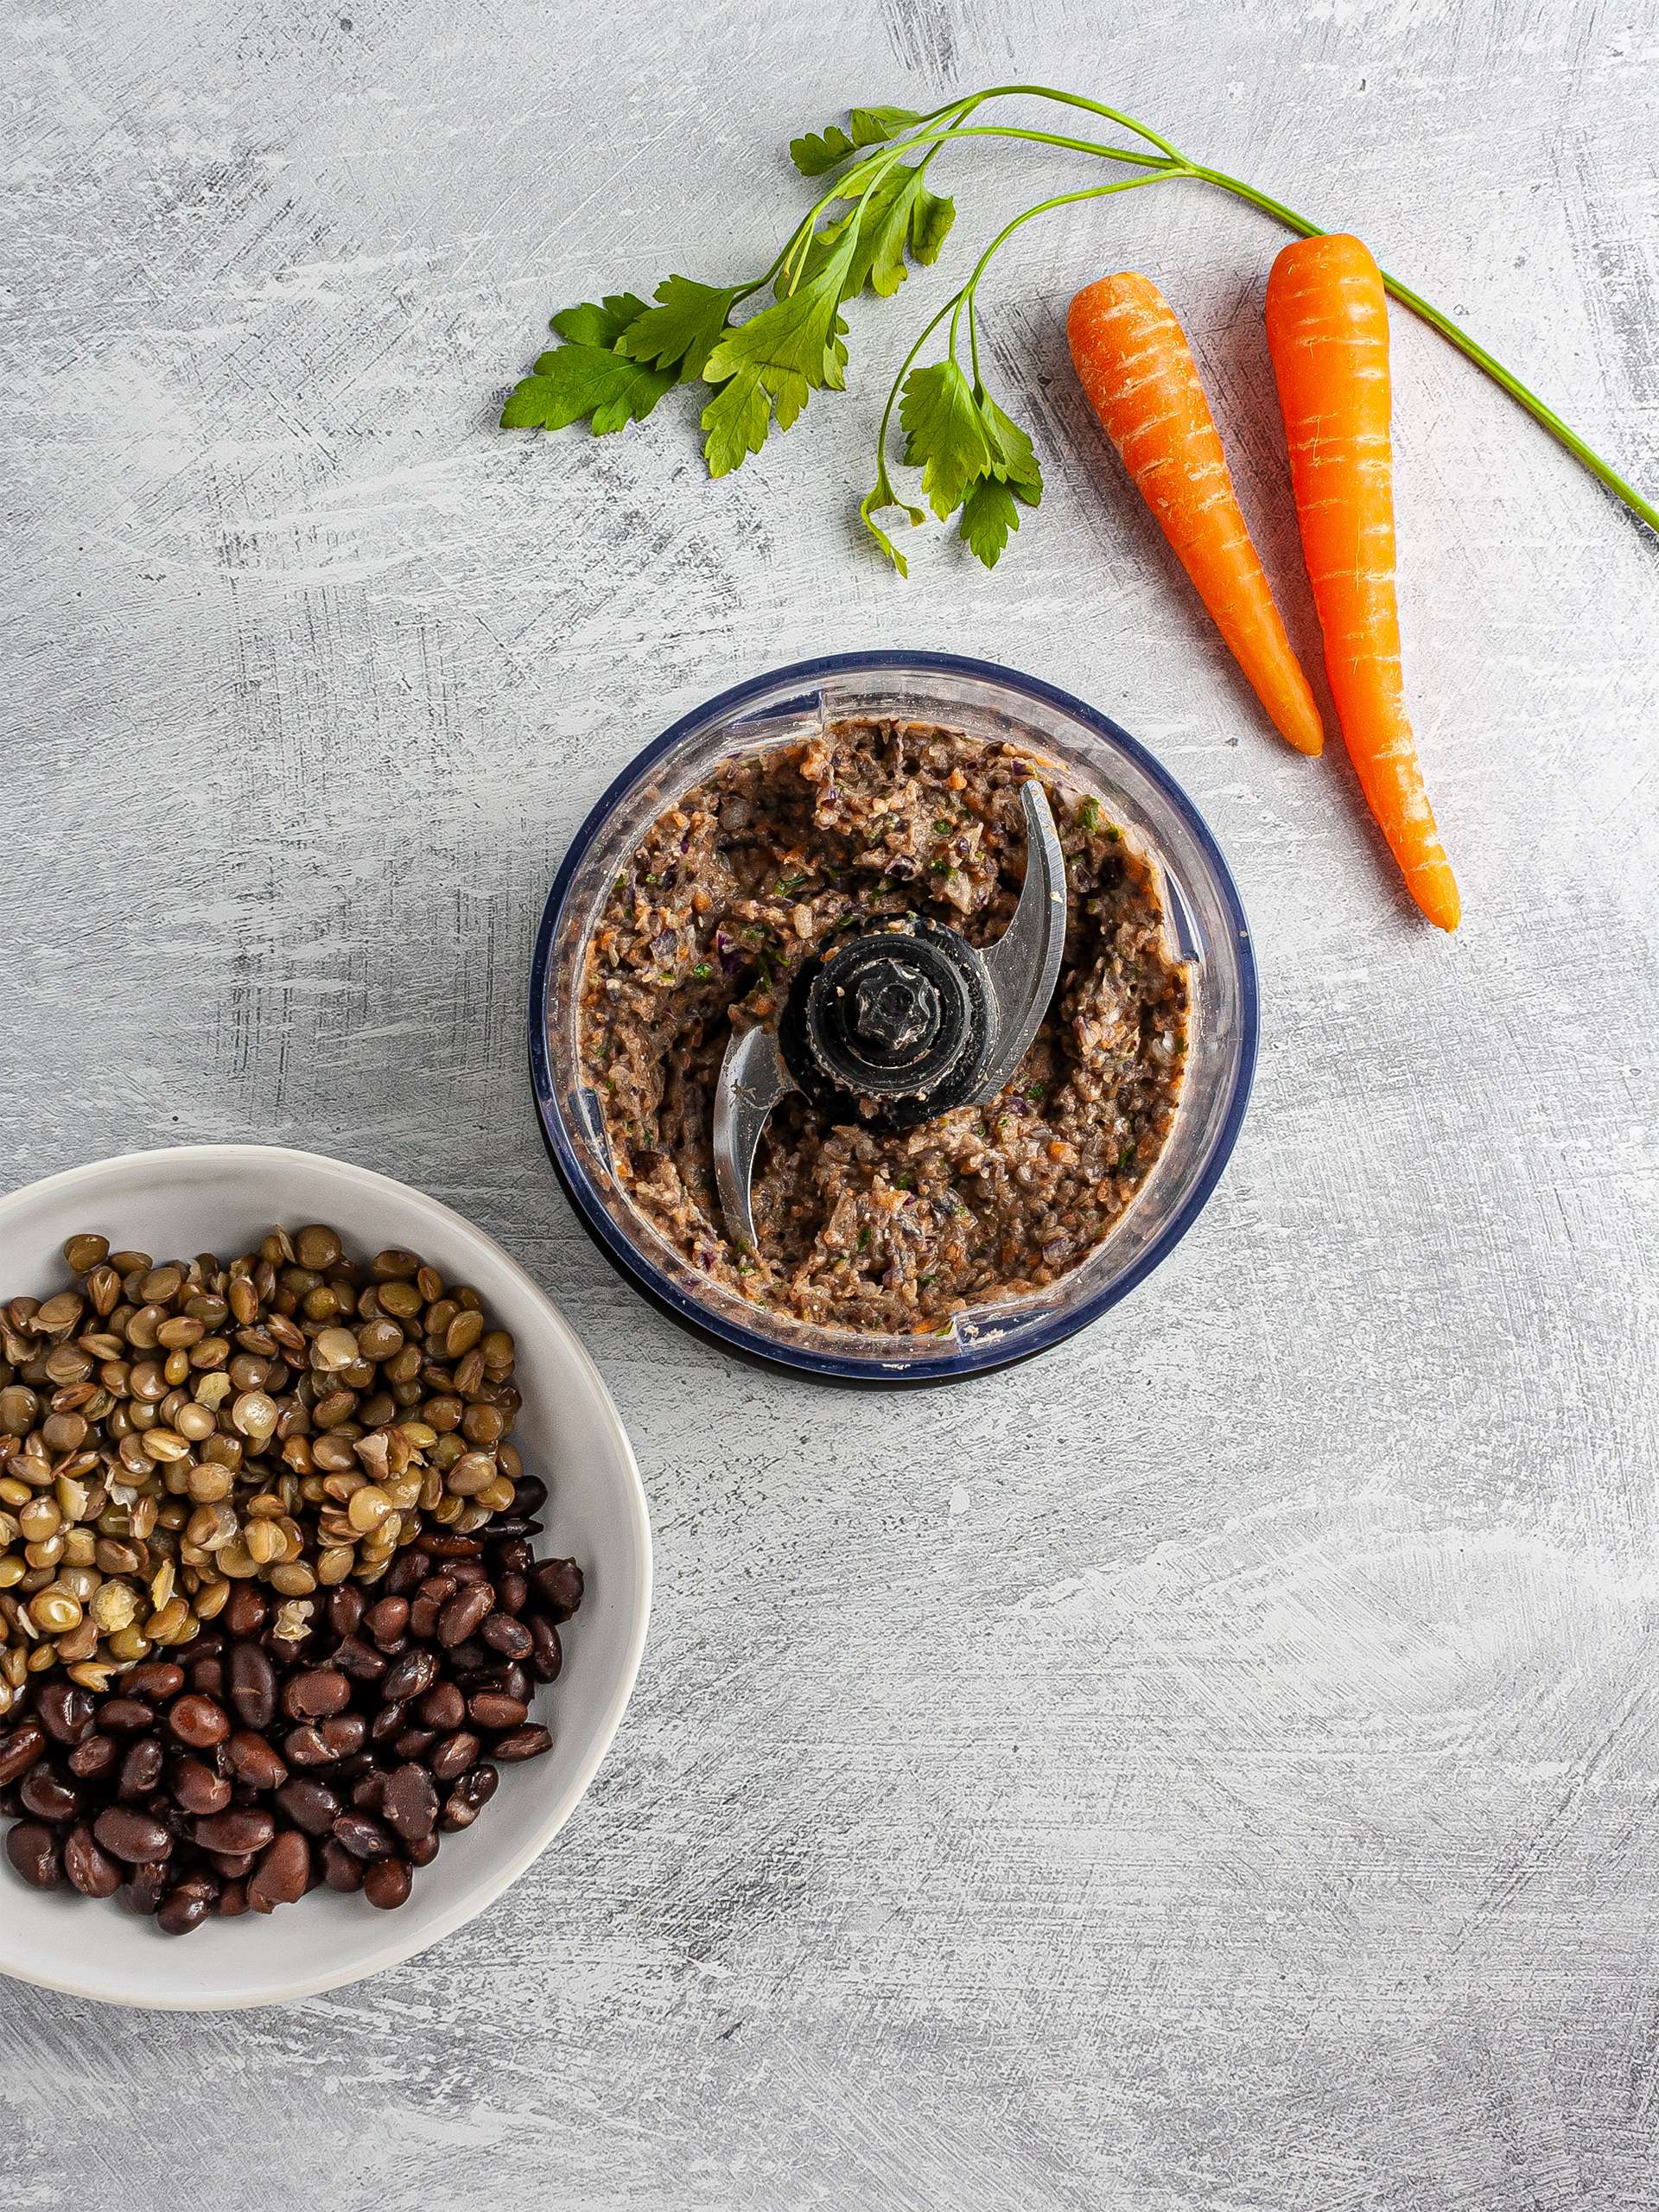 Black beans and lentils blended with carrots and parsley